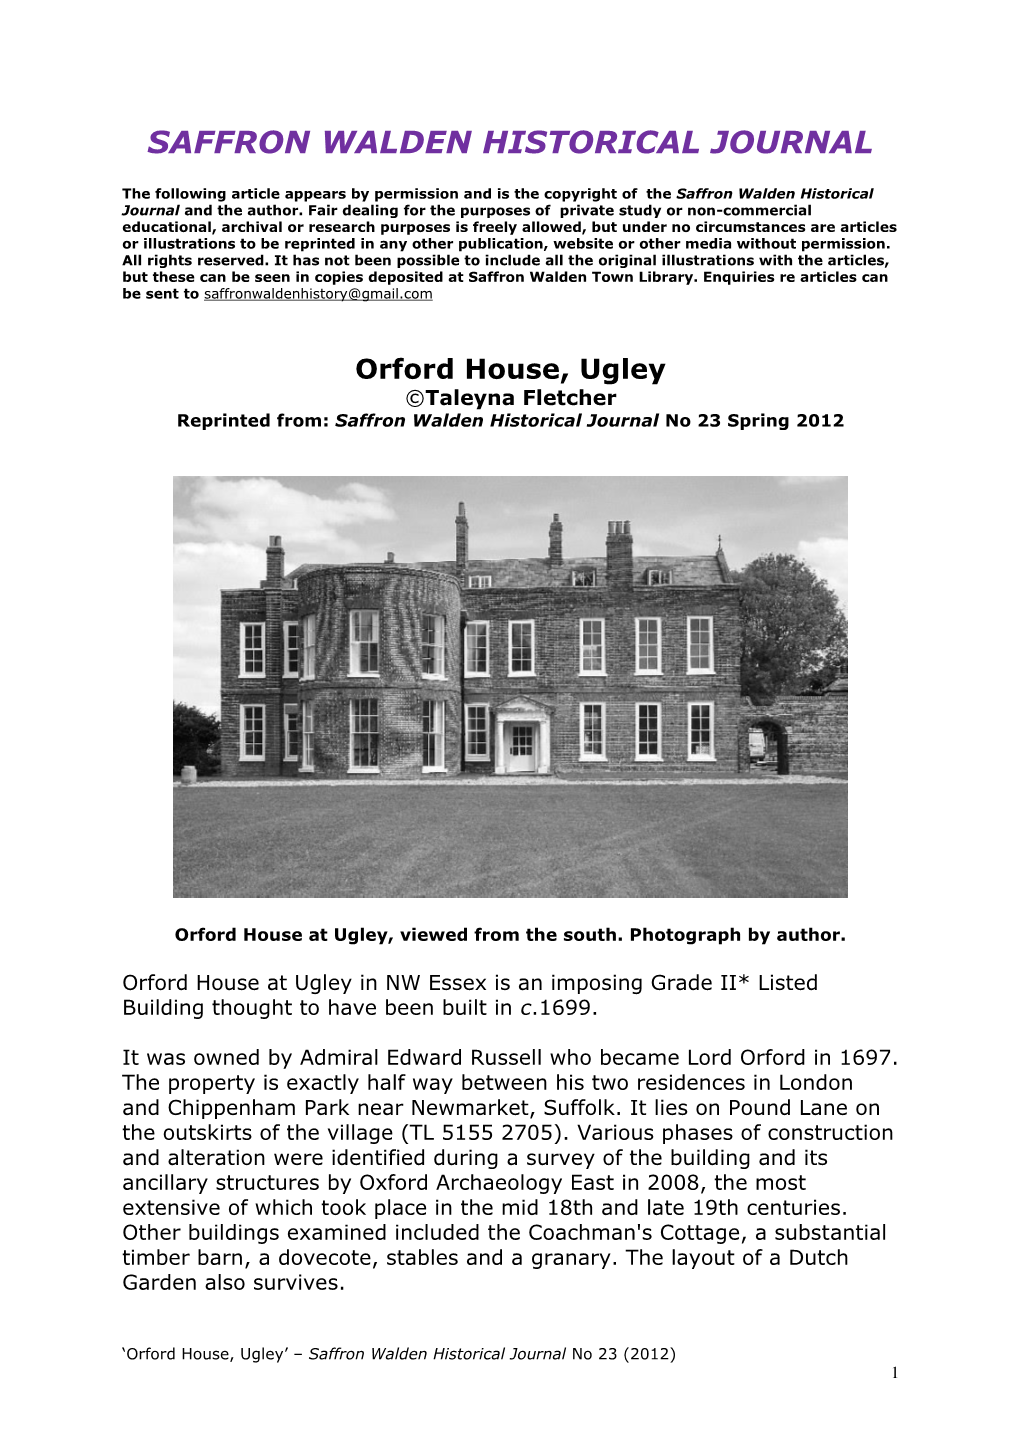 Orford House, Ugley ©Taleyna Fletcher Reprinted From: Saffron Walden Historical Journal No 23 Spring 2012